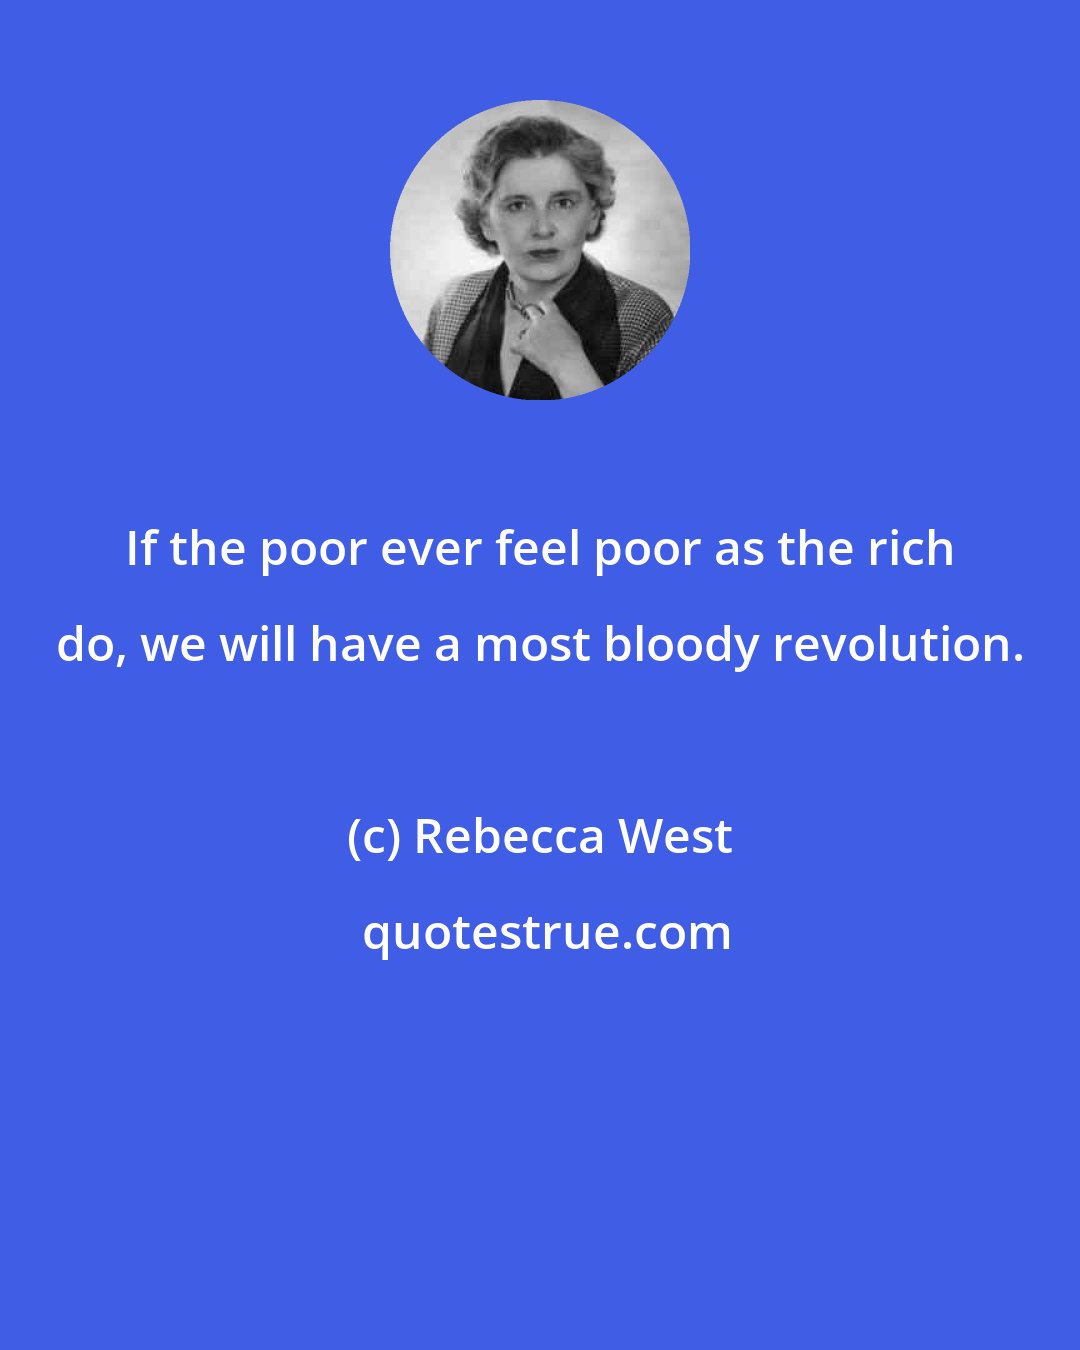 Rebecca West: If the poor ever feel poor as the rich do, we will have a most bloody revolution.